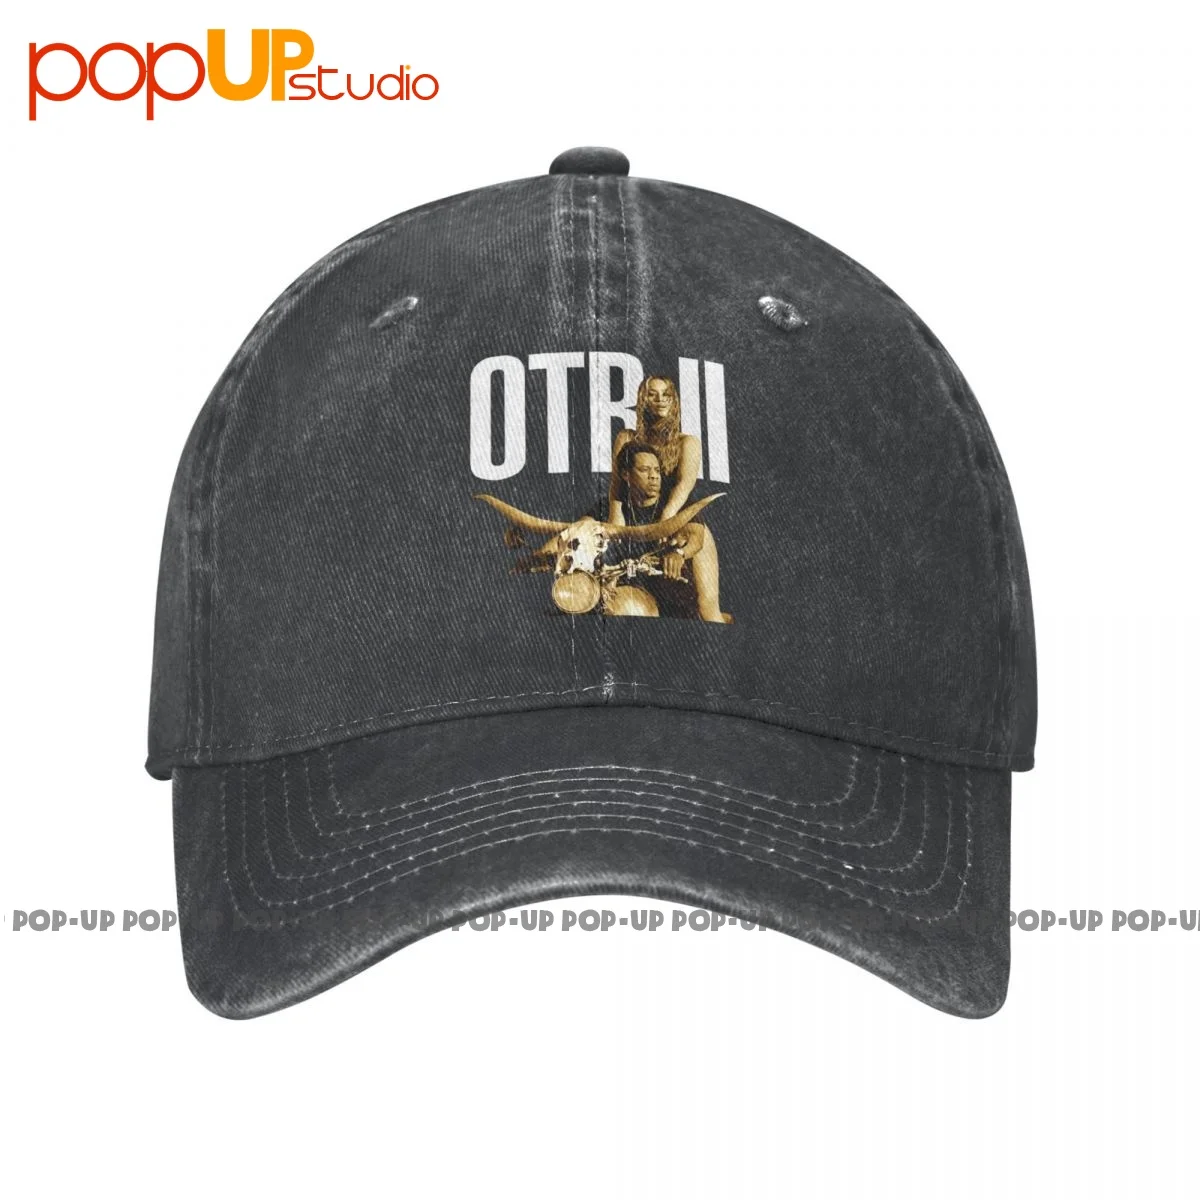 Tour Beyonc Cap Washed Ii AliExpress Concert Trucker Z American - The Denim Jay On Hats Hop Baseball Hip Run North And